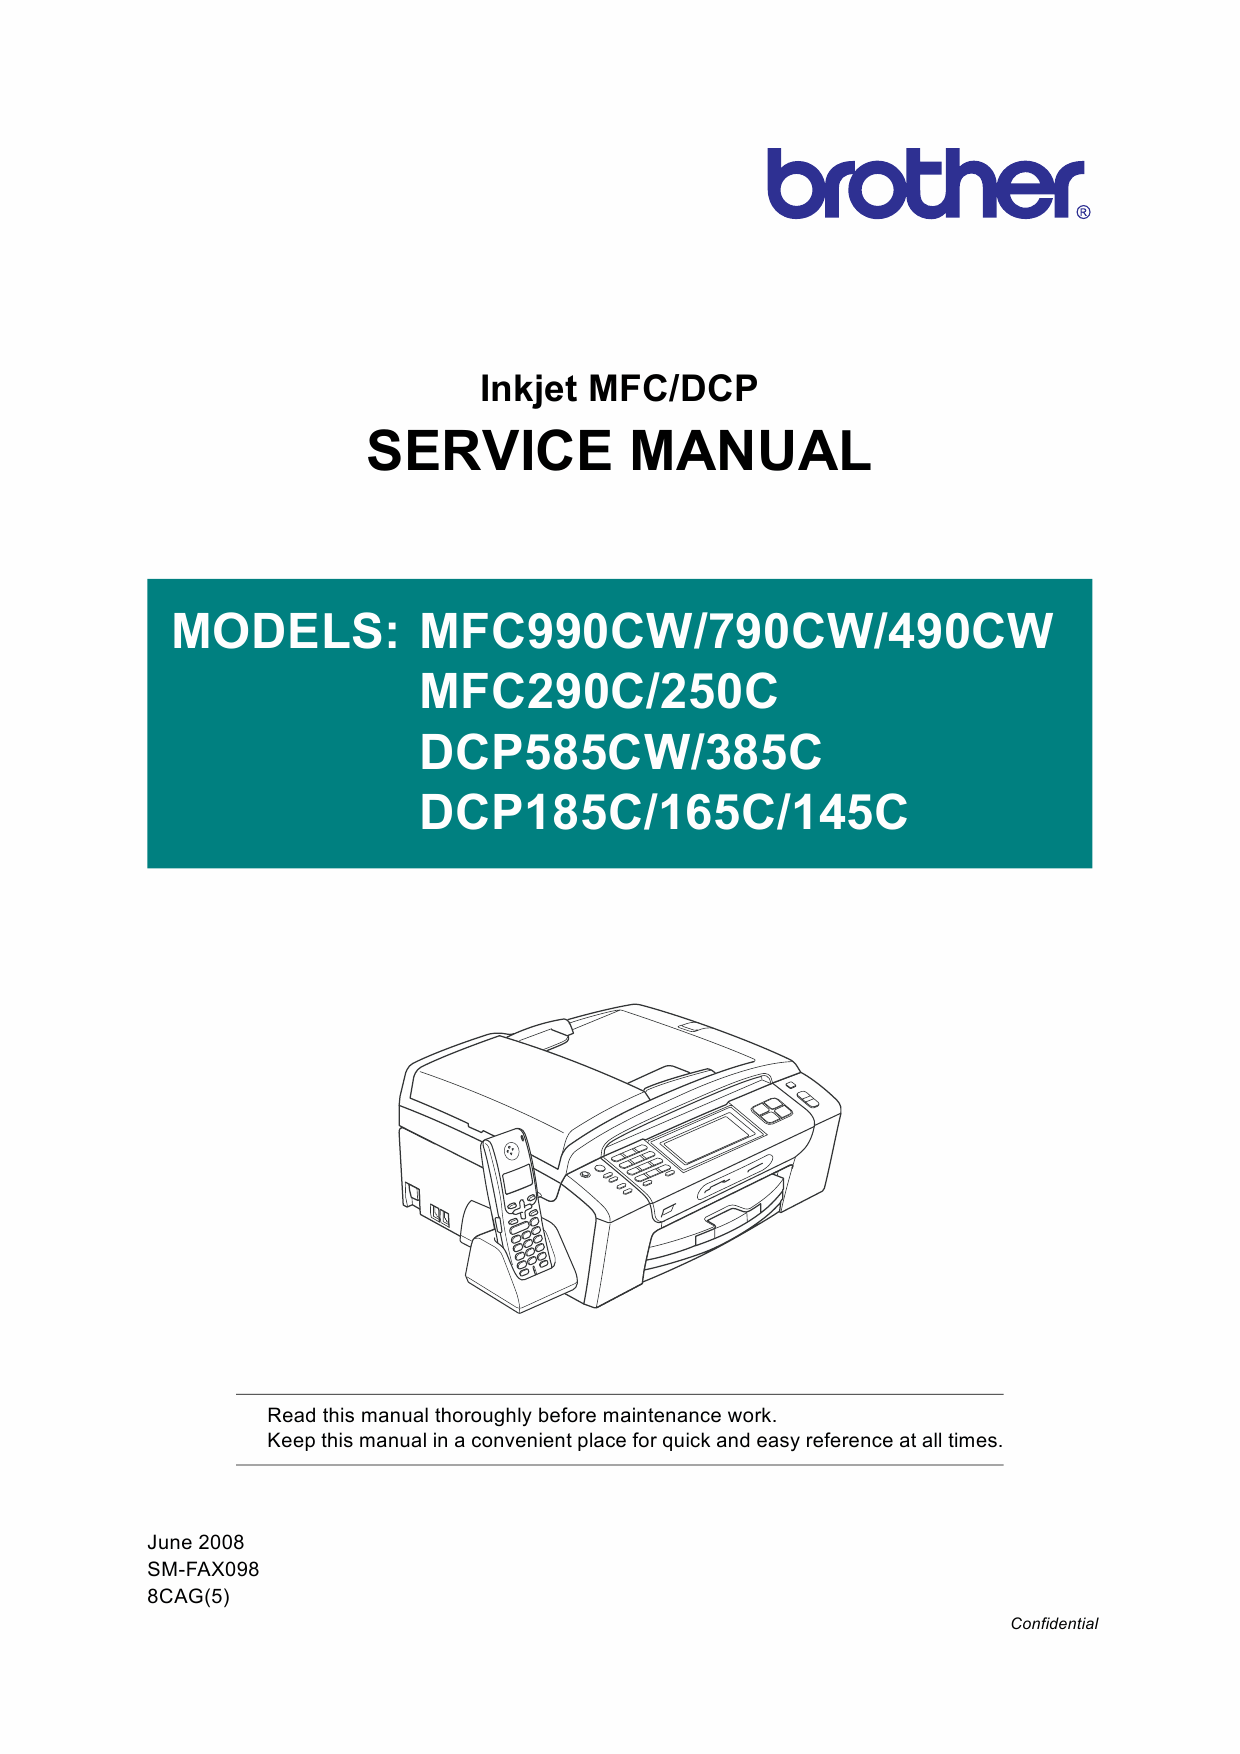 Brother Inkjet-MFC 250 290 490 790 990 C CW DCP145 165 185 285 585 C-CW Service Manual-1